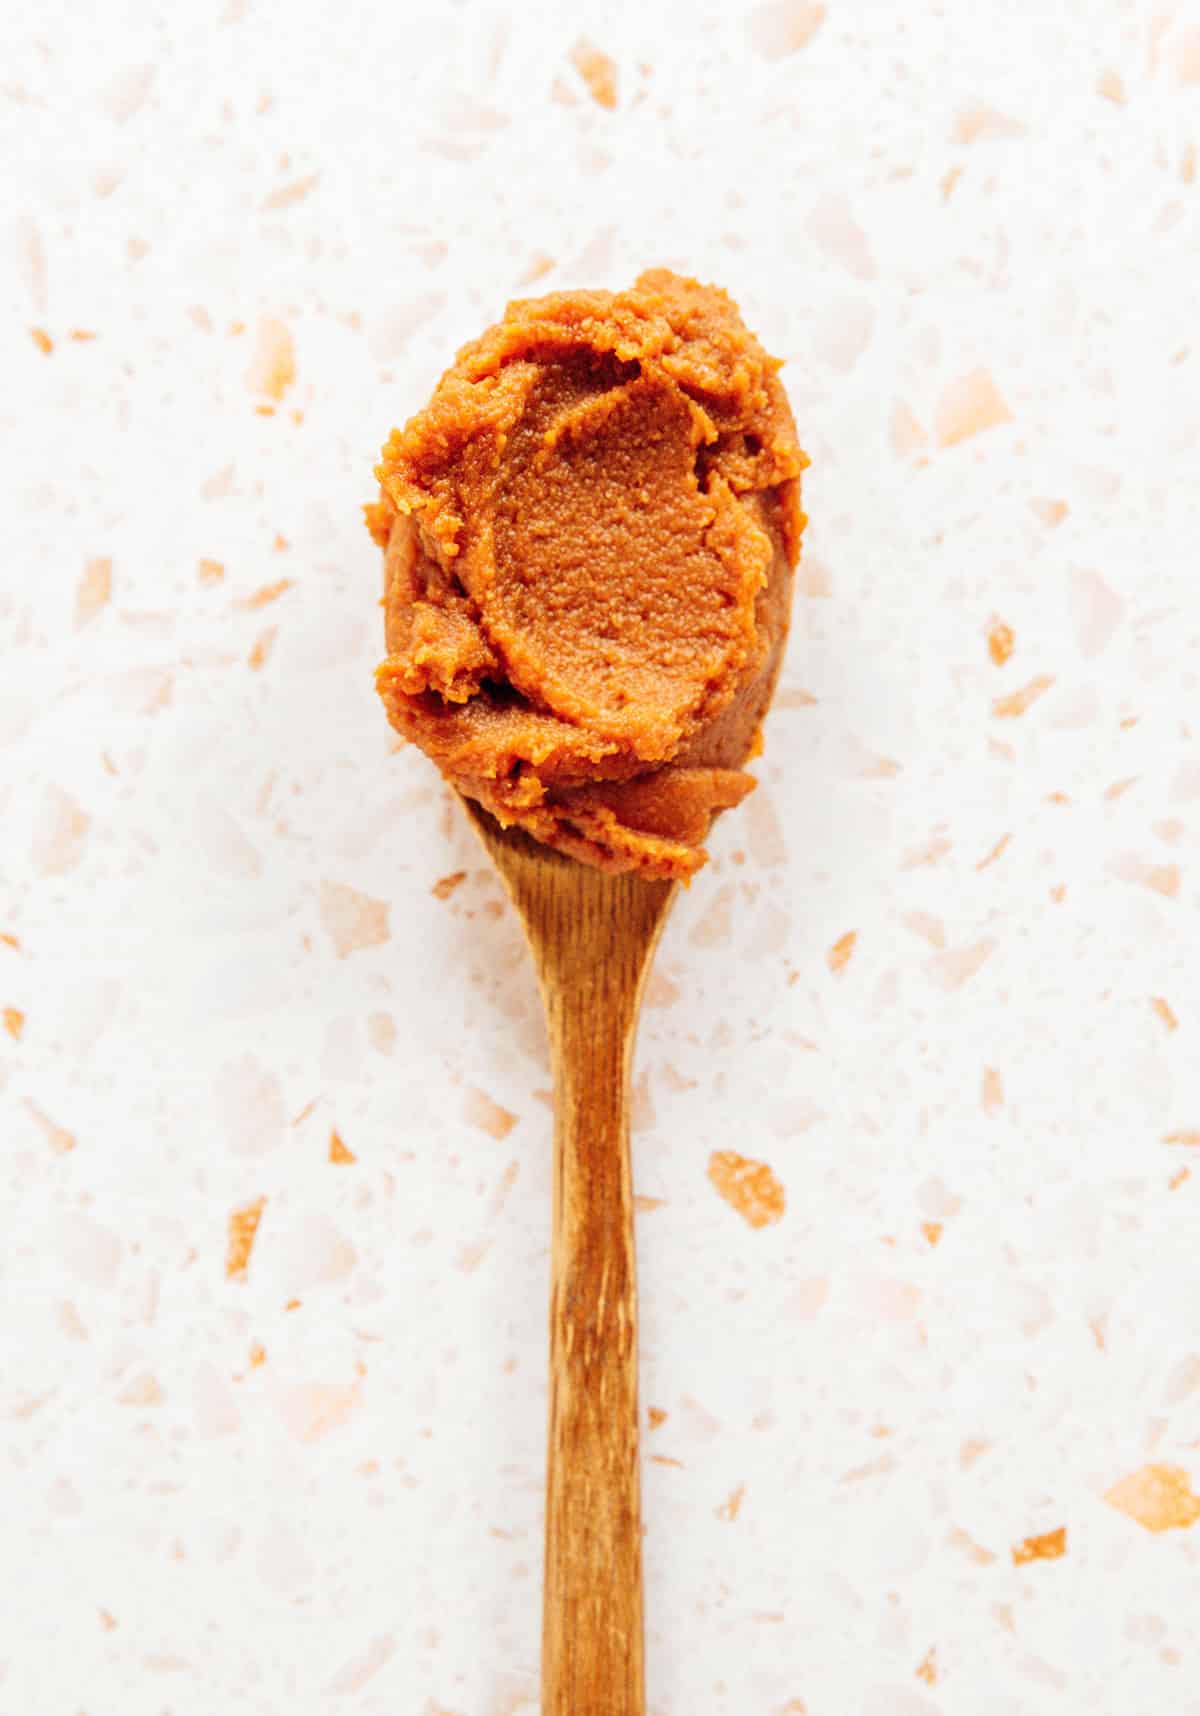 Miso paste on a spoon.